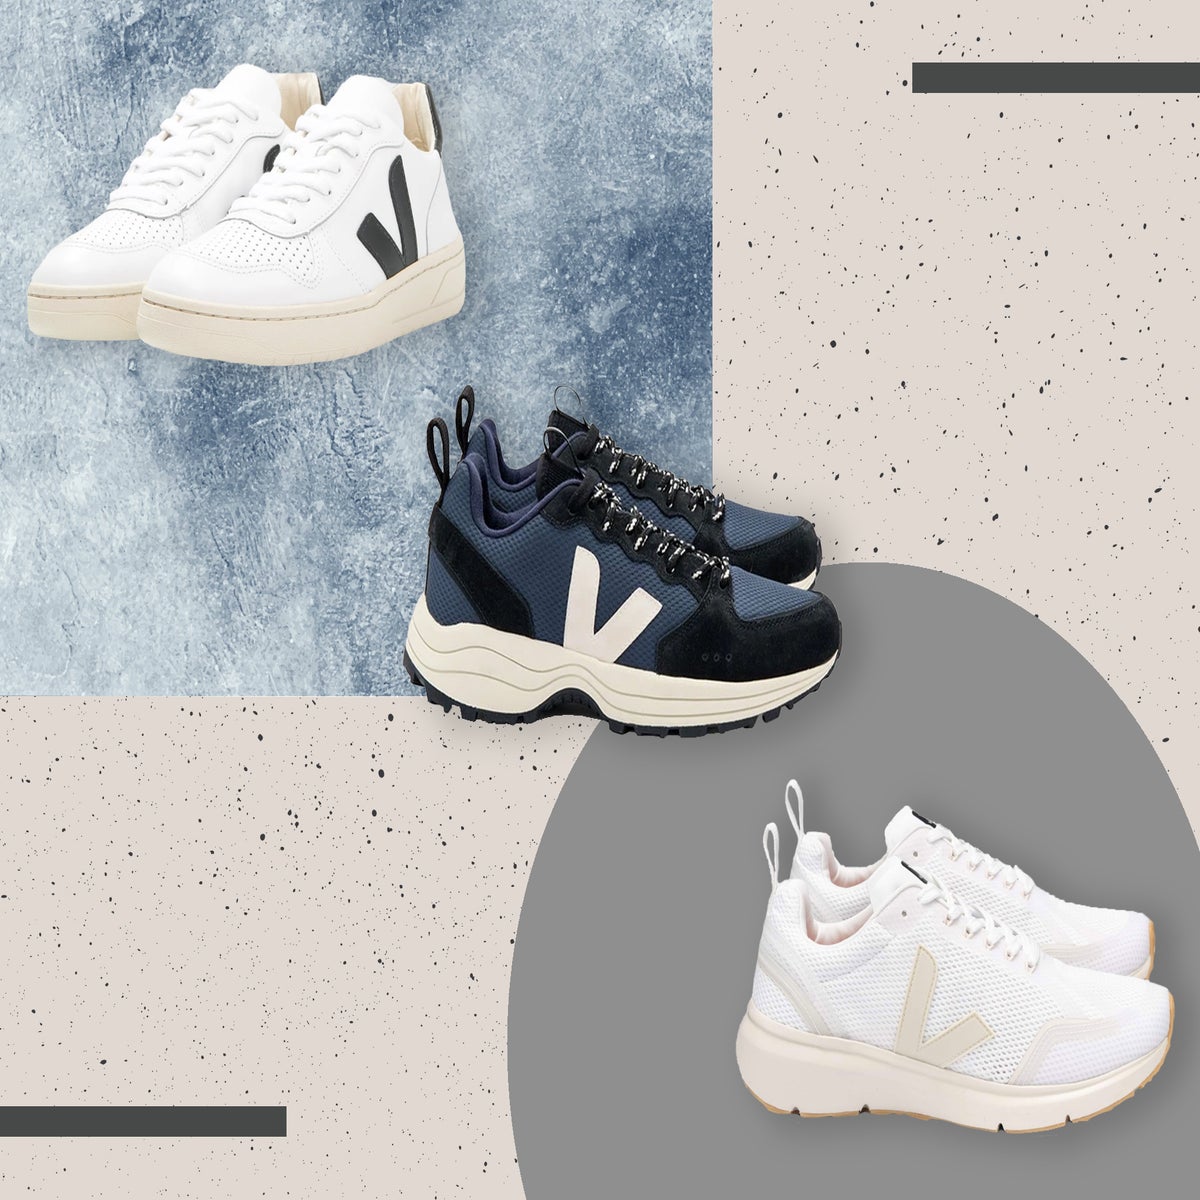 Coach Footwear Buyer's Guide, Story, Style & Sizing